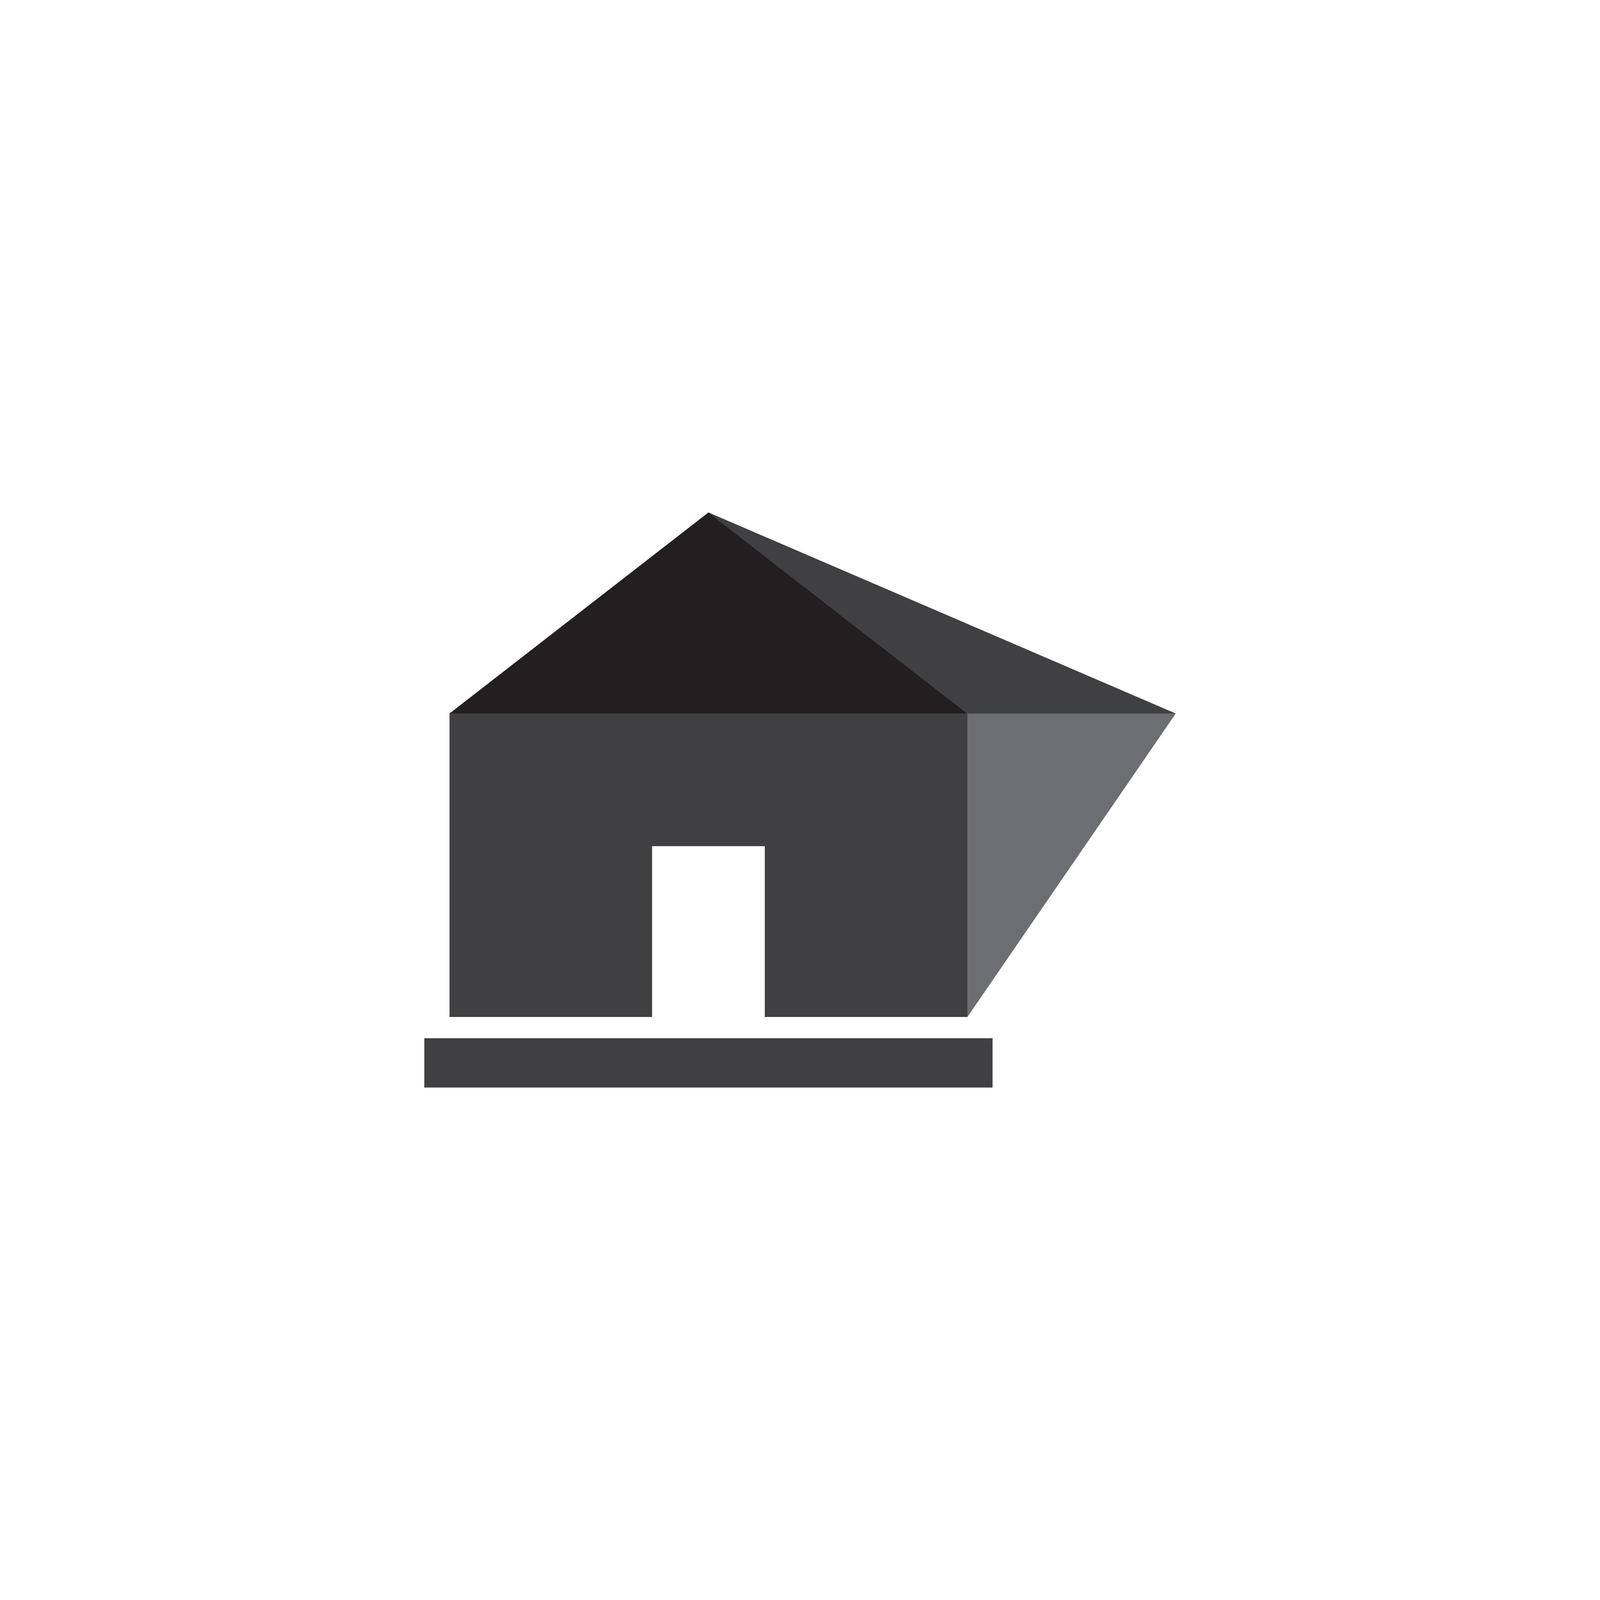 Home logo by rnking